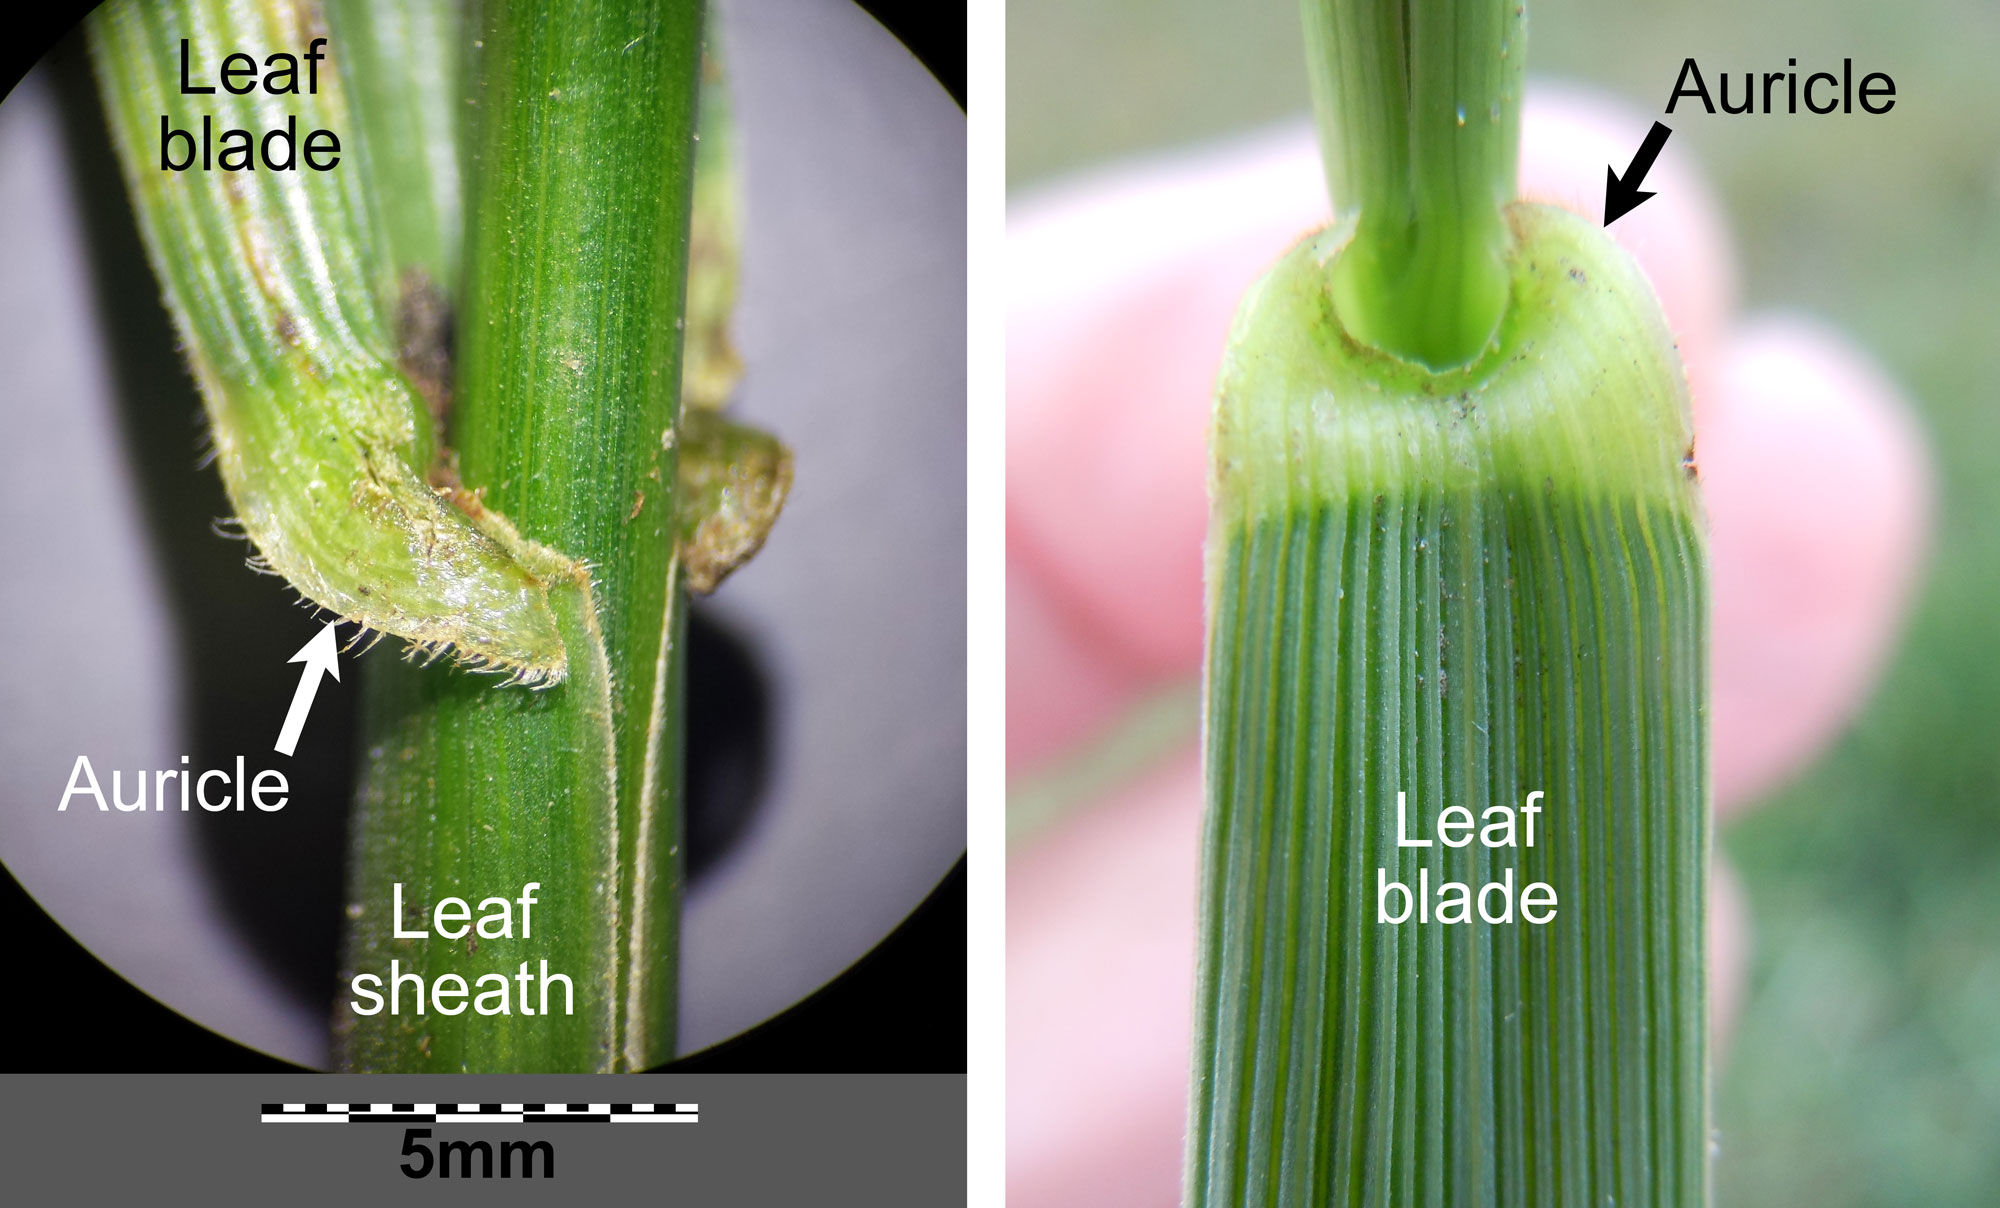 Photographs of the leaf of tall fescue from two different plants, showing two views of the auricles at the junction of the leaf sheath and the leaf blade. The left photo shows the auricle from the side, the right shows the auricle from above, with the auricle pulled away from the stem.